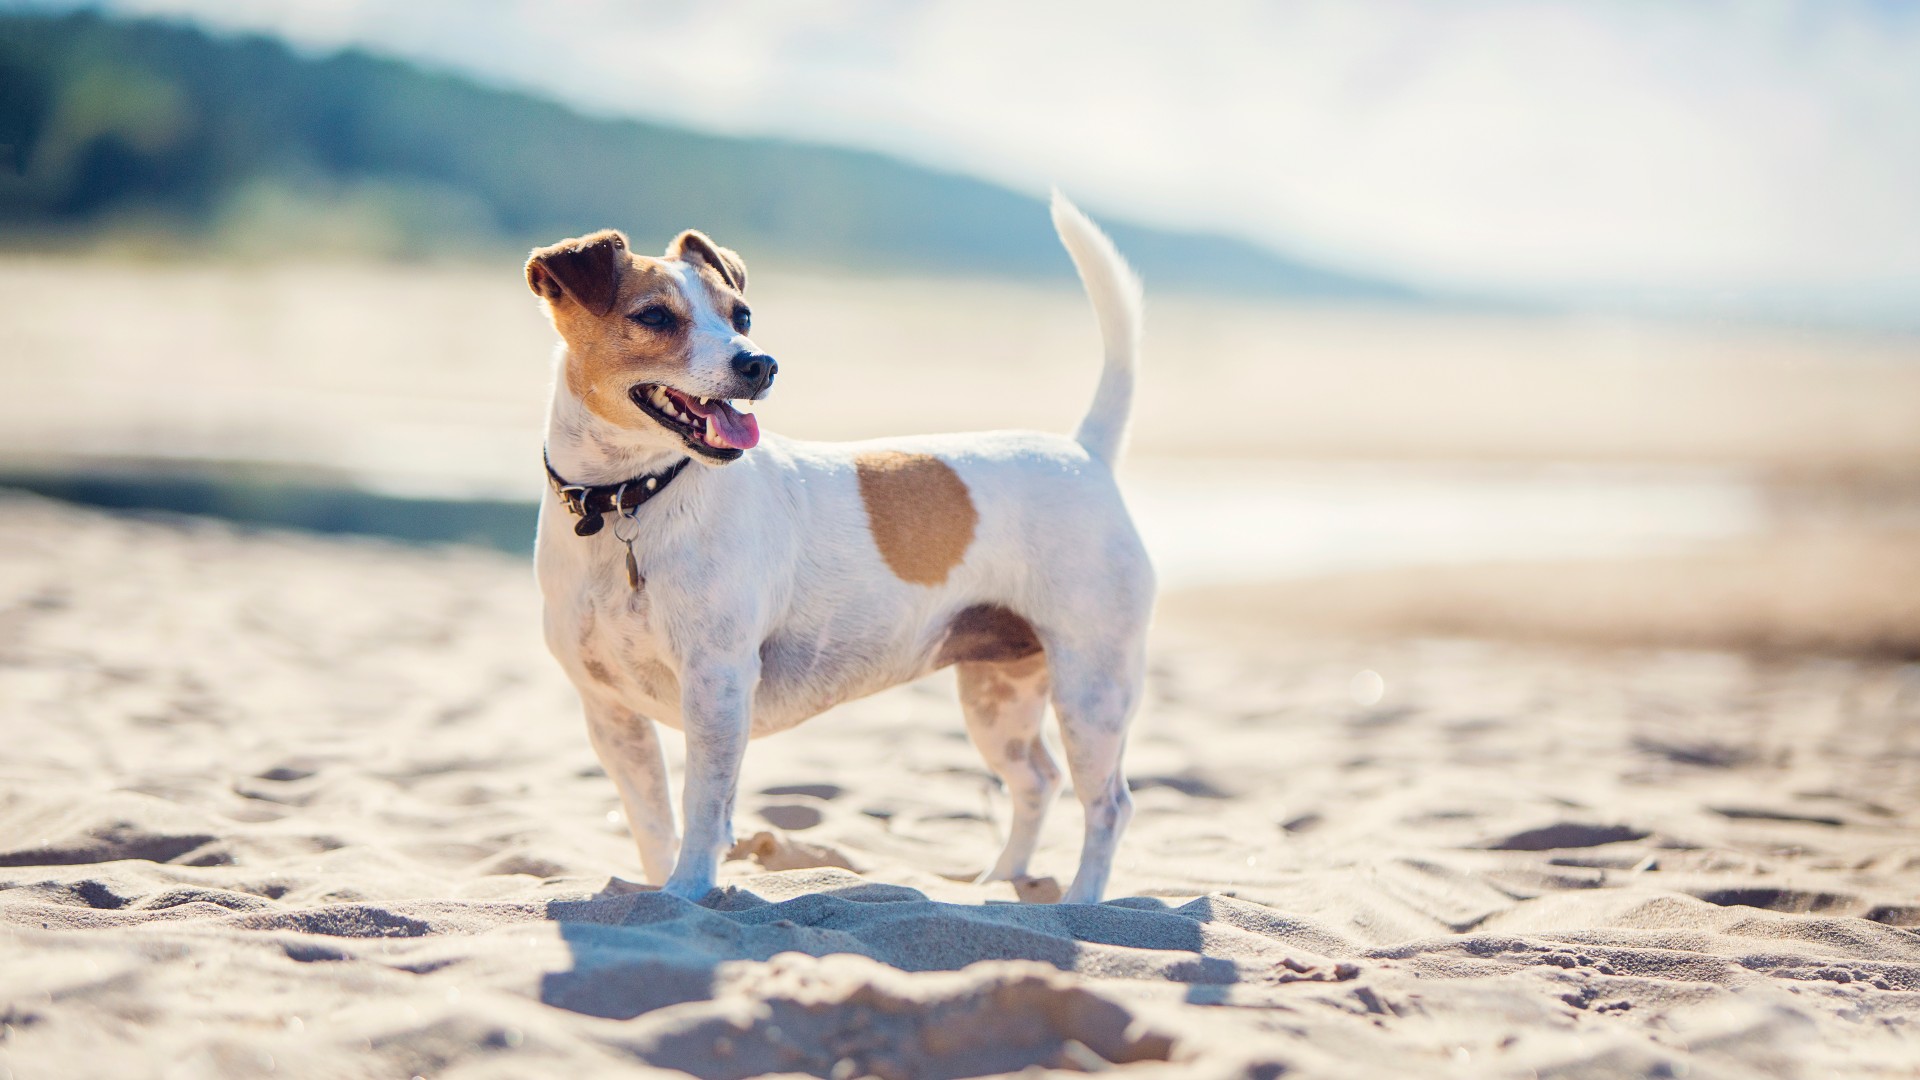 Jack Russell Terrier standing on the beach on a sunny day